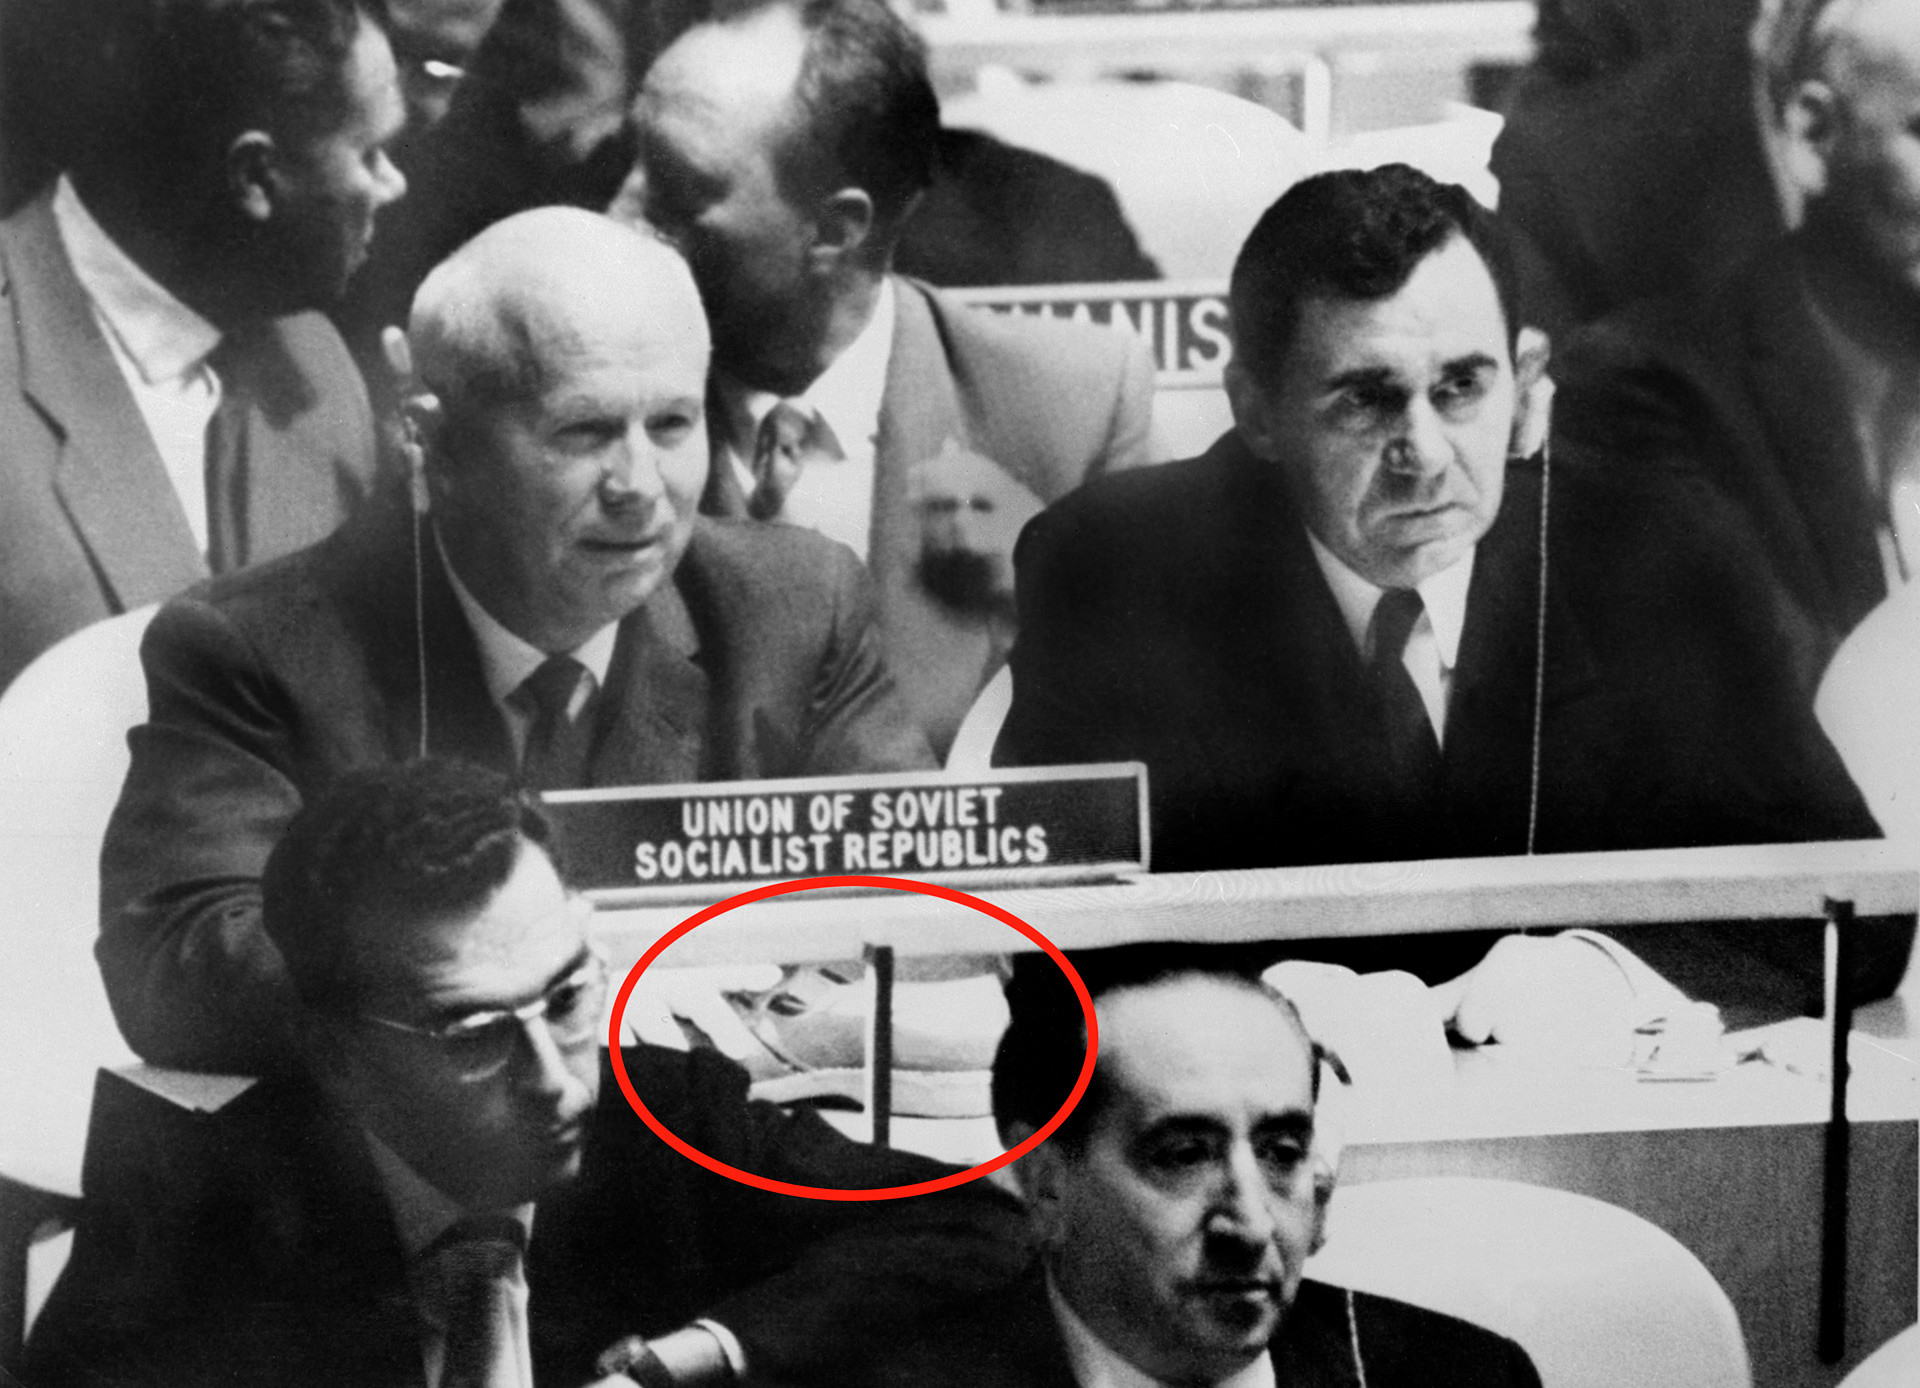 The actual photo of Nikita Khrushchev and Soviet Minister of Foreign Affairs Andrey Gromyko (R) at the meeting of the General Assembly of the United Nations on October 12, 1960. Red circle marks the shoe on Khrushchev's table.